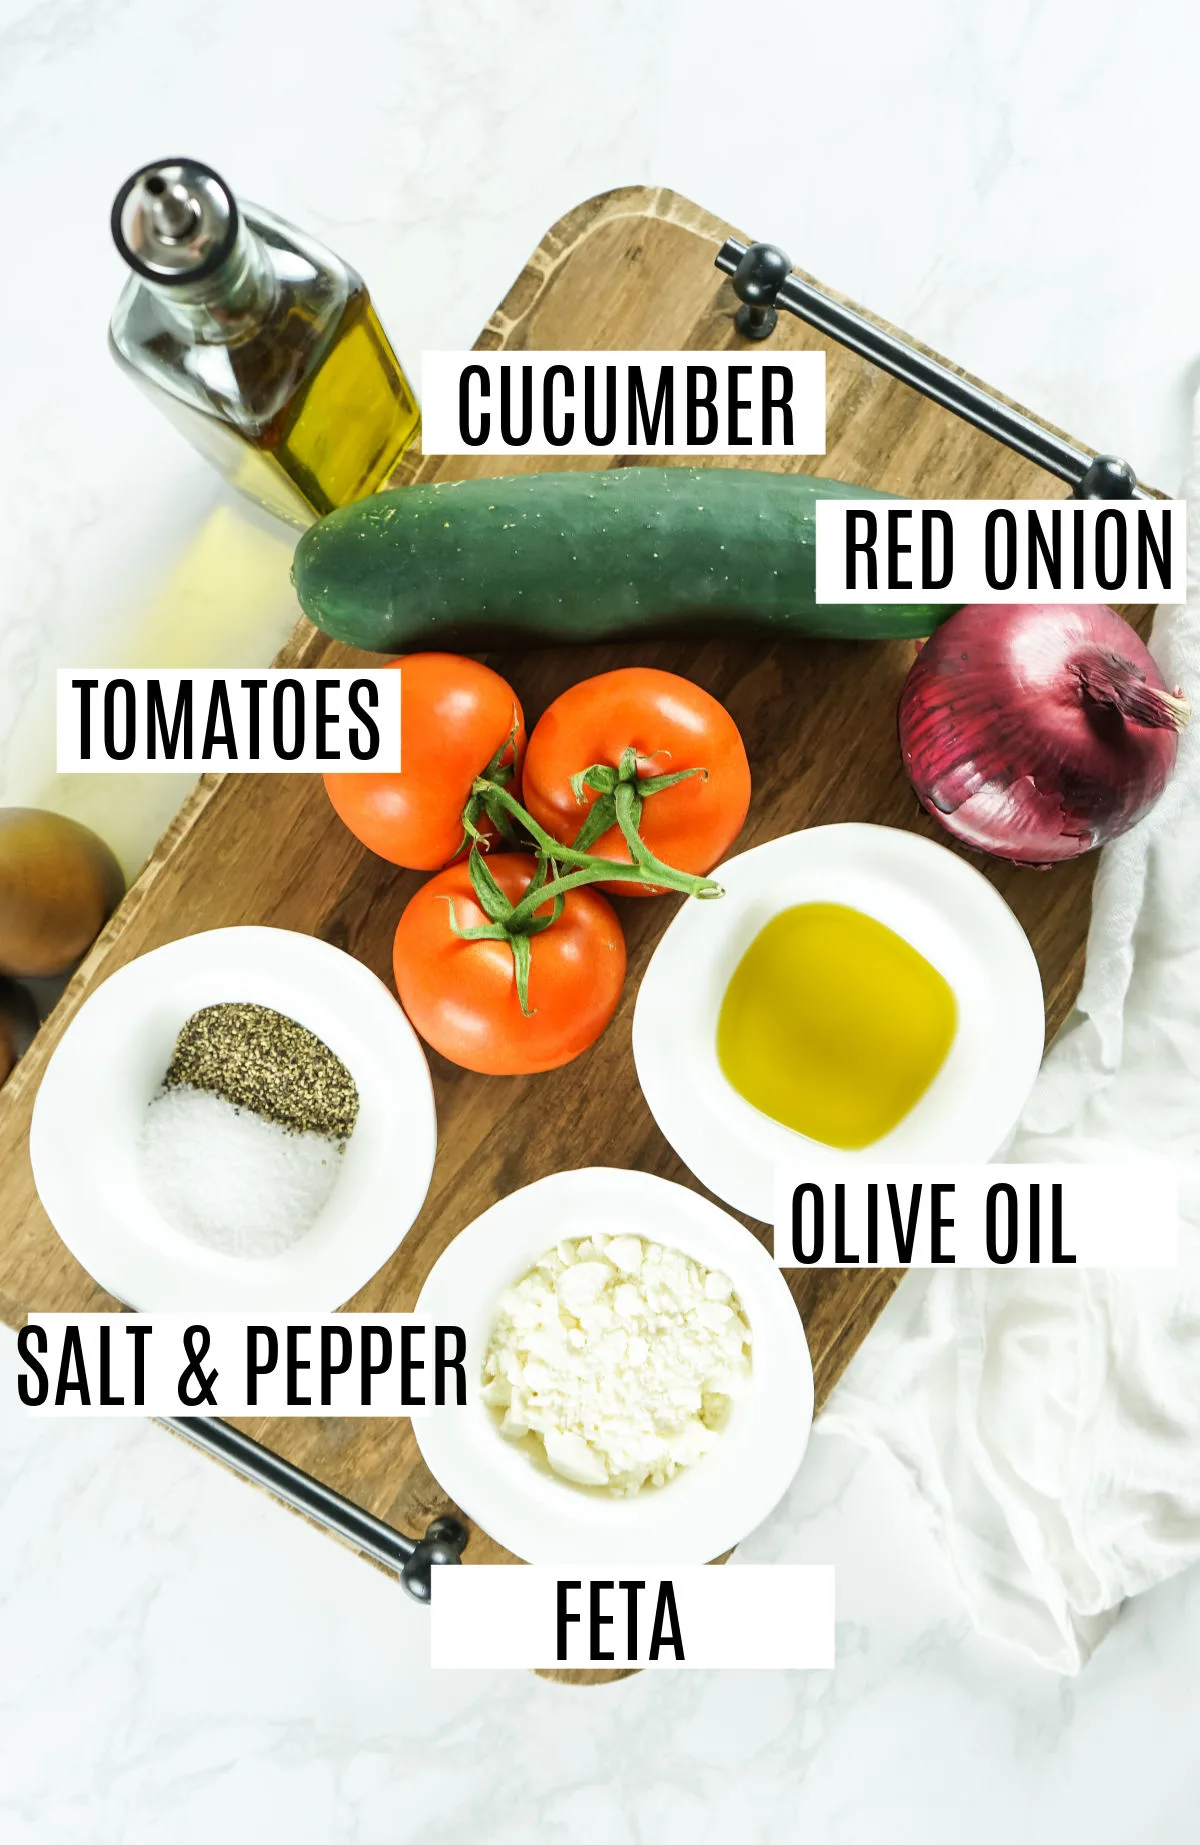 Ingredients needed to make a fresh cucumber tomato salad.